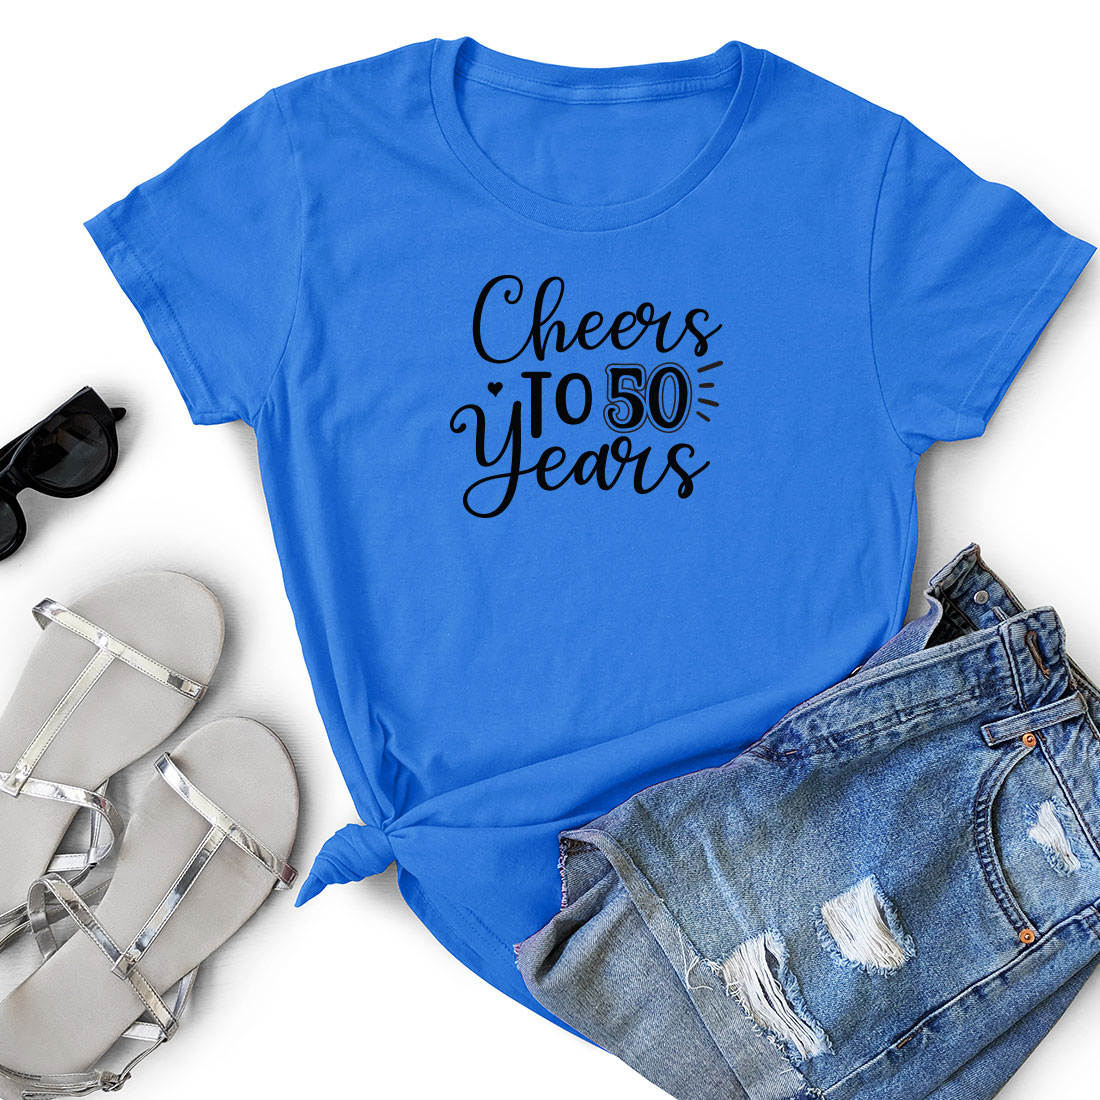 T - shirt that says cheers 100 years next to a pair of shorts.